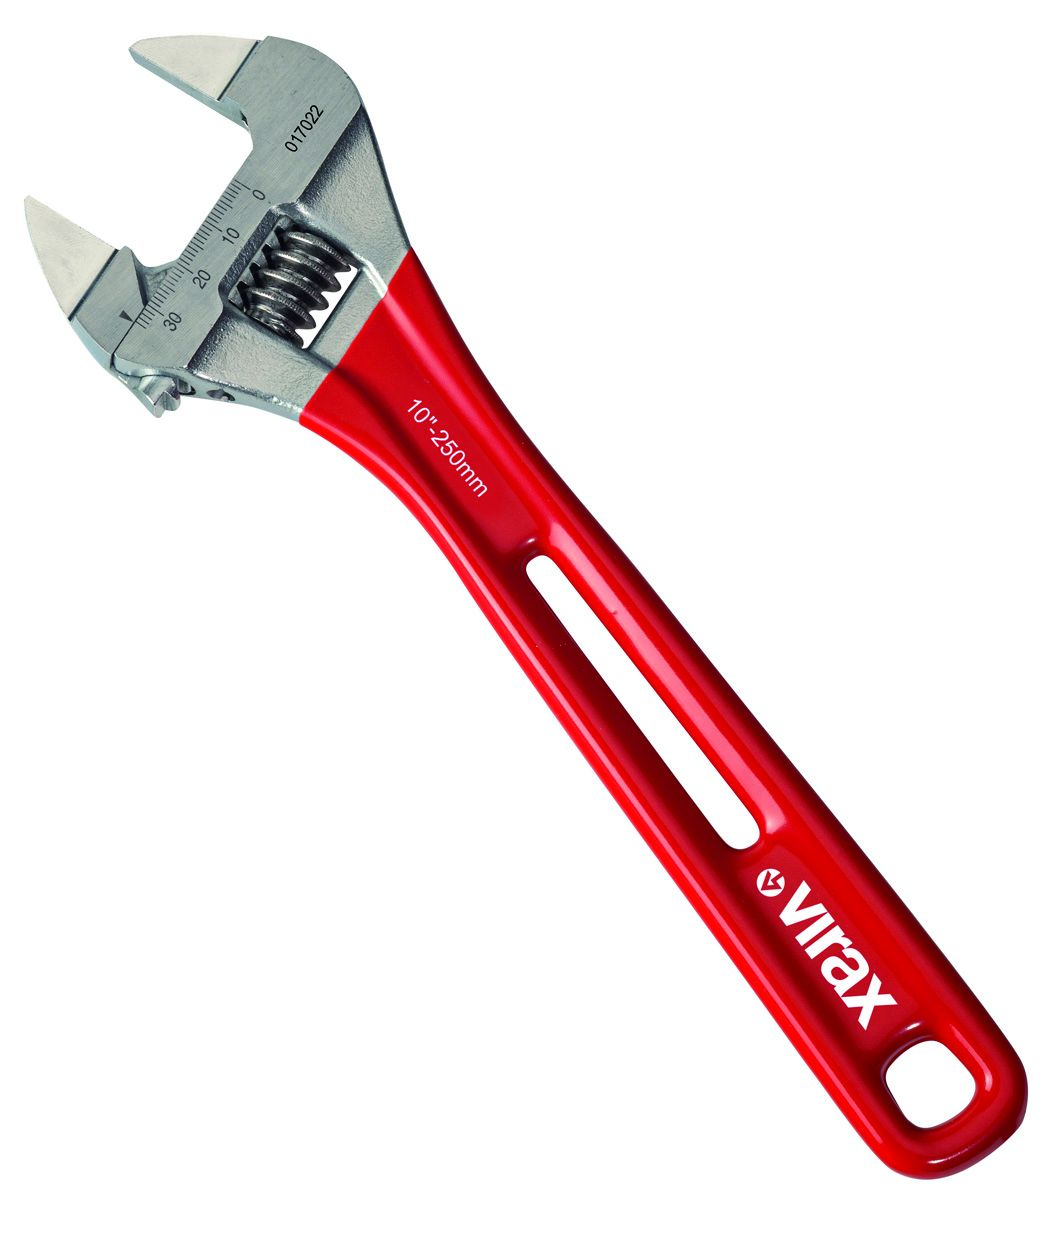 Virax Adjustable Spanner, 259 mm Overall Length, 36mm Max Jaw Capacity